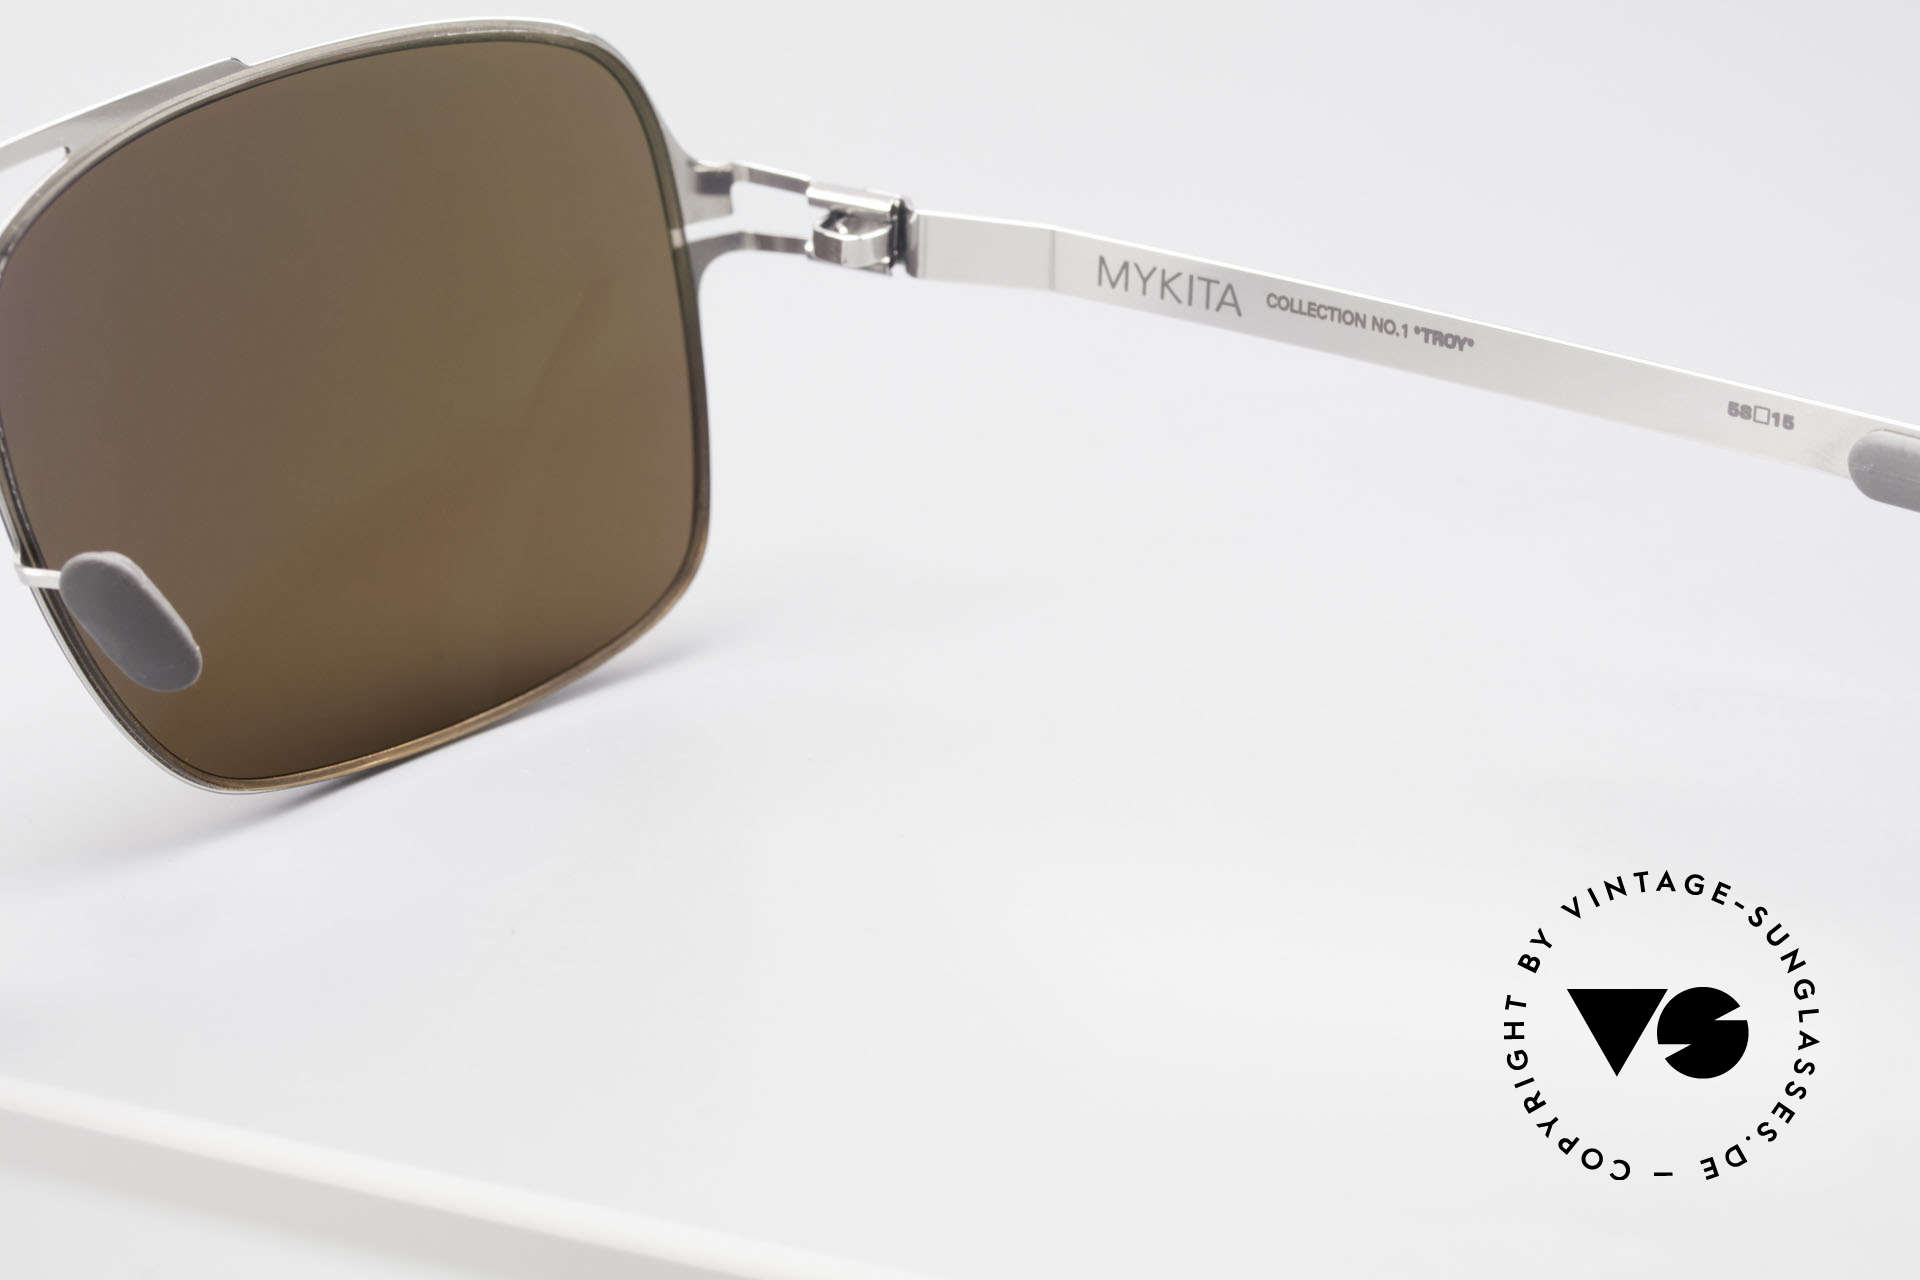 Mykita Troy Collection No 1 Mykita Shades, thus, now available from us (unworn and with orig. case), Made for Men